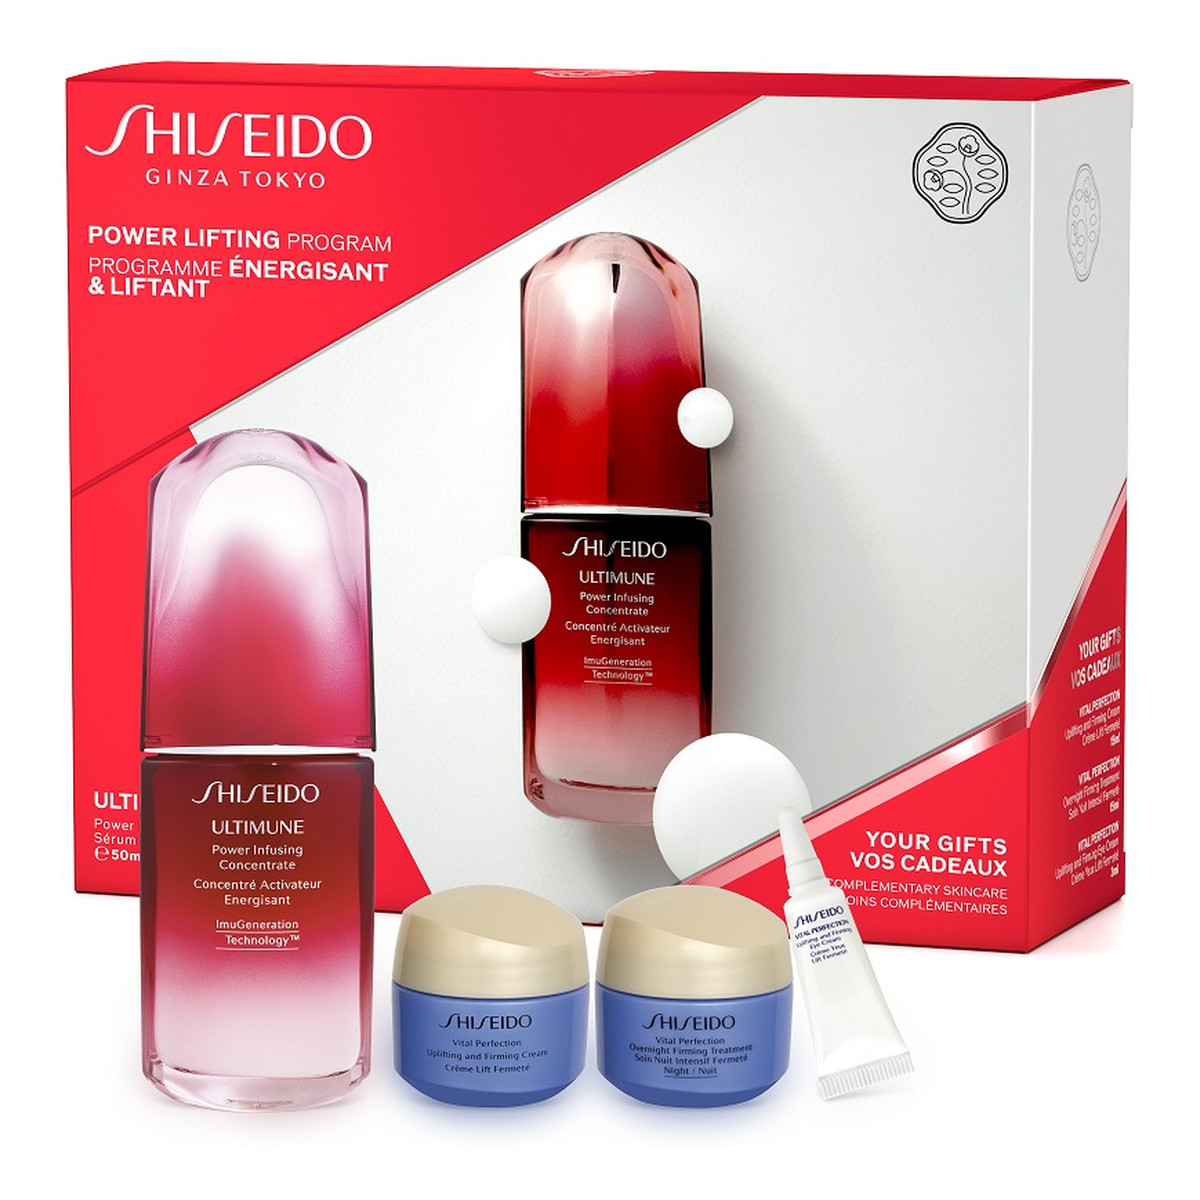 Shiseido Power Lifting Program Zestaw ultimune power infusing concentrate 50ml + vital perfection cream 15ml + vital perfection overnight firming treatment 15ml + vital perfection eye cream 3ml